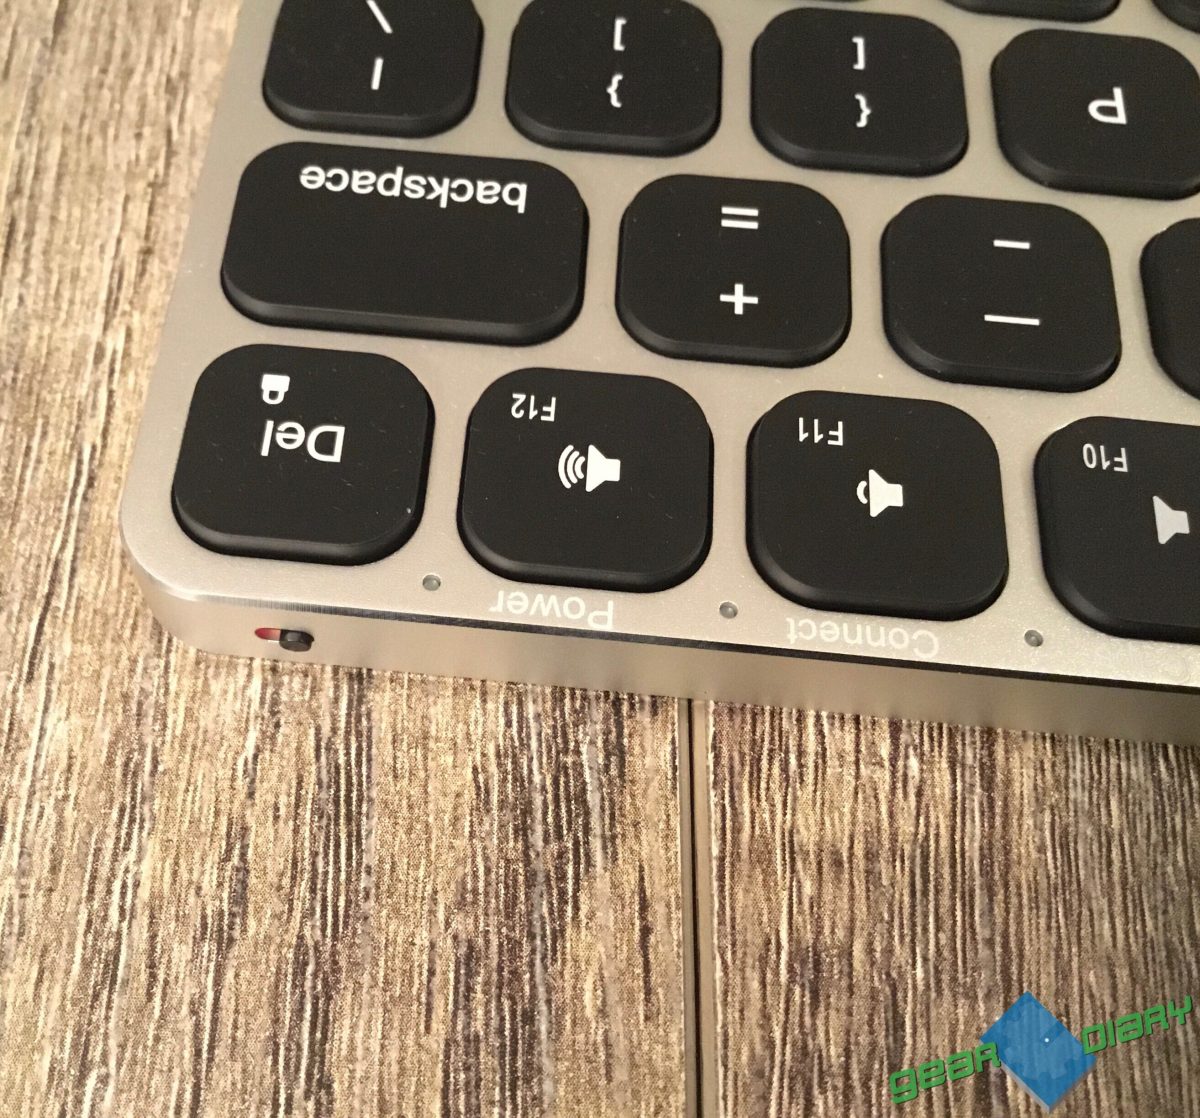 Kanex Mini Multi-Sync Keyboard Allows for Continuity Between Your Devices